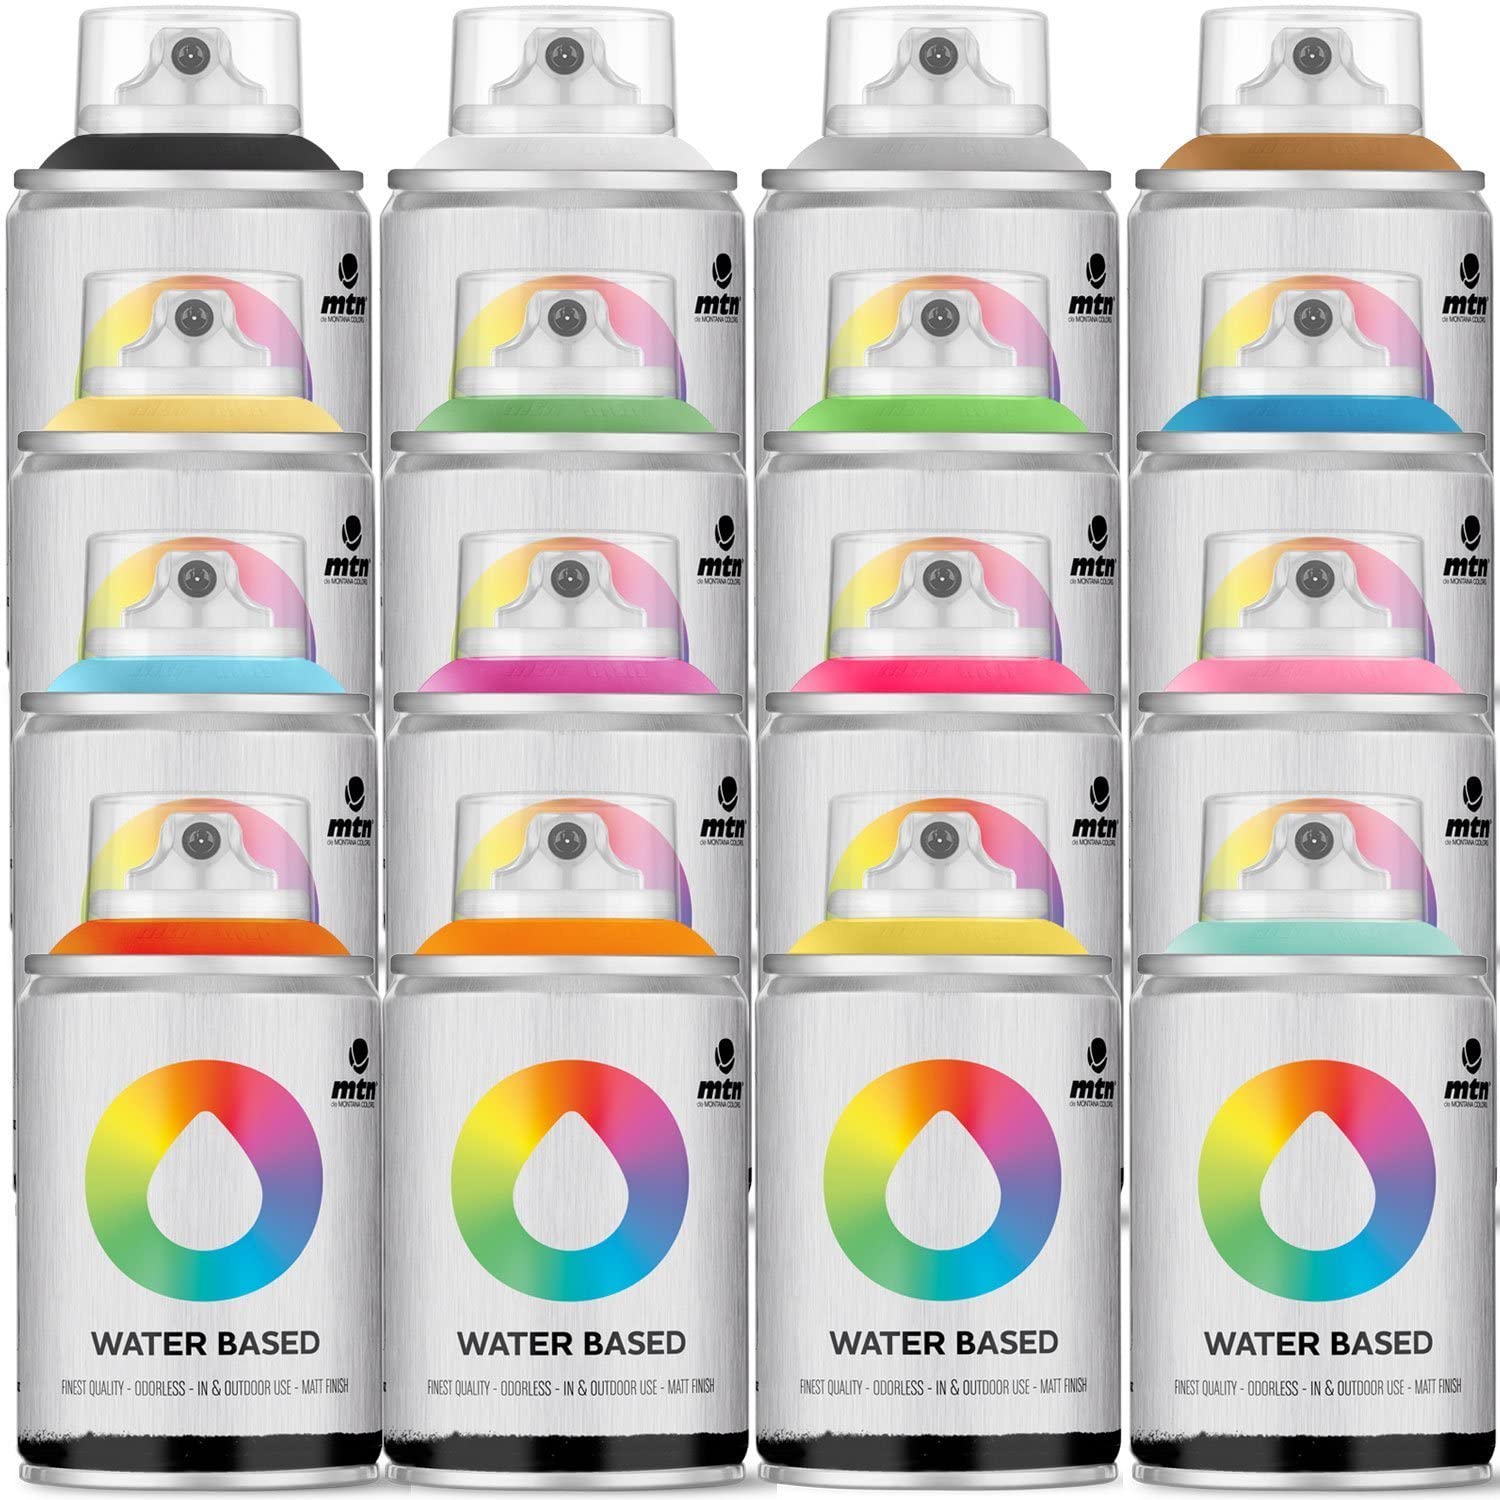 MTN Spray Paint Packs - Water Based close up